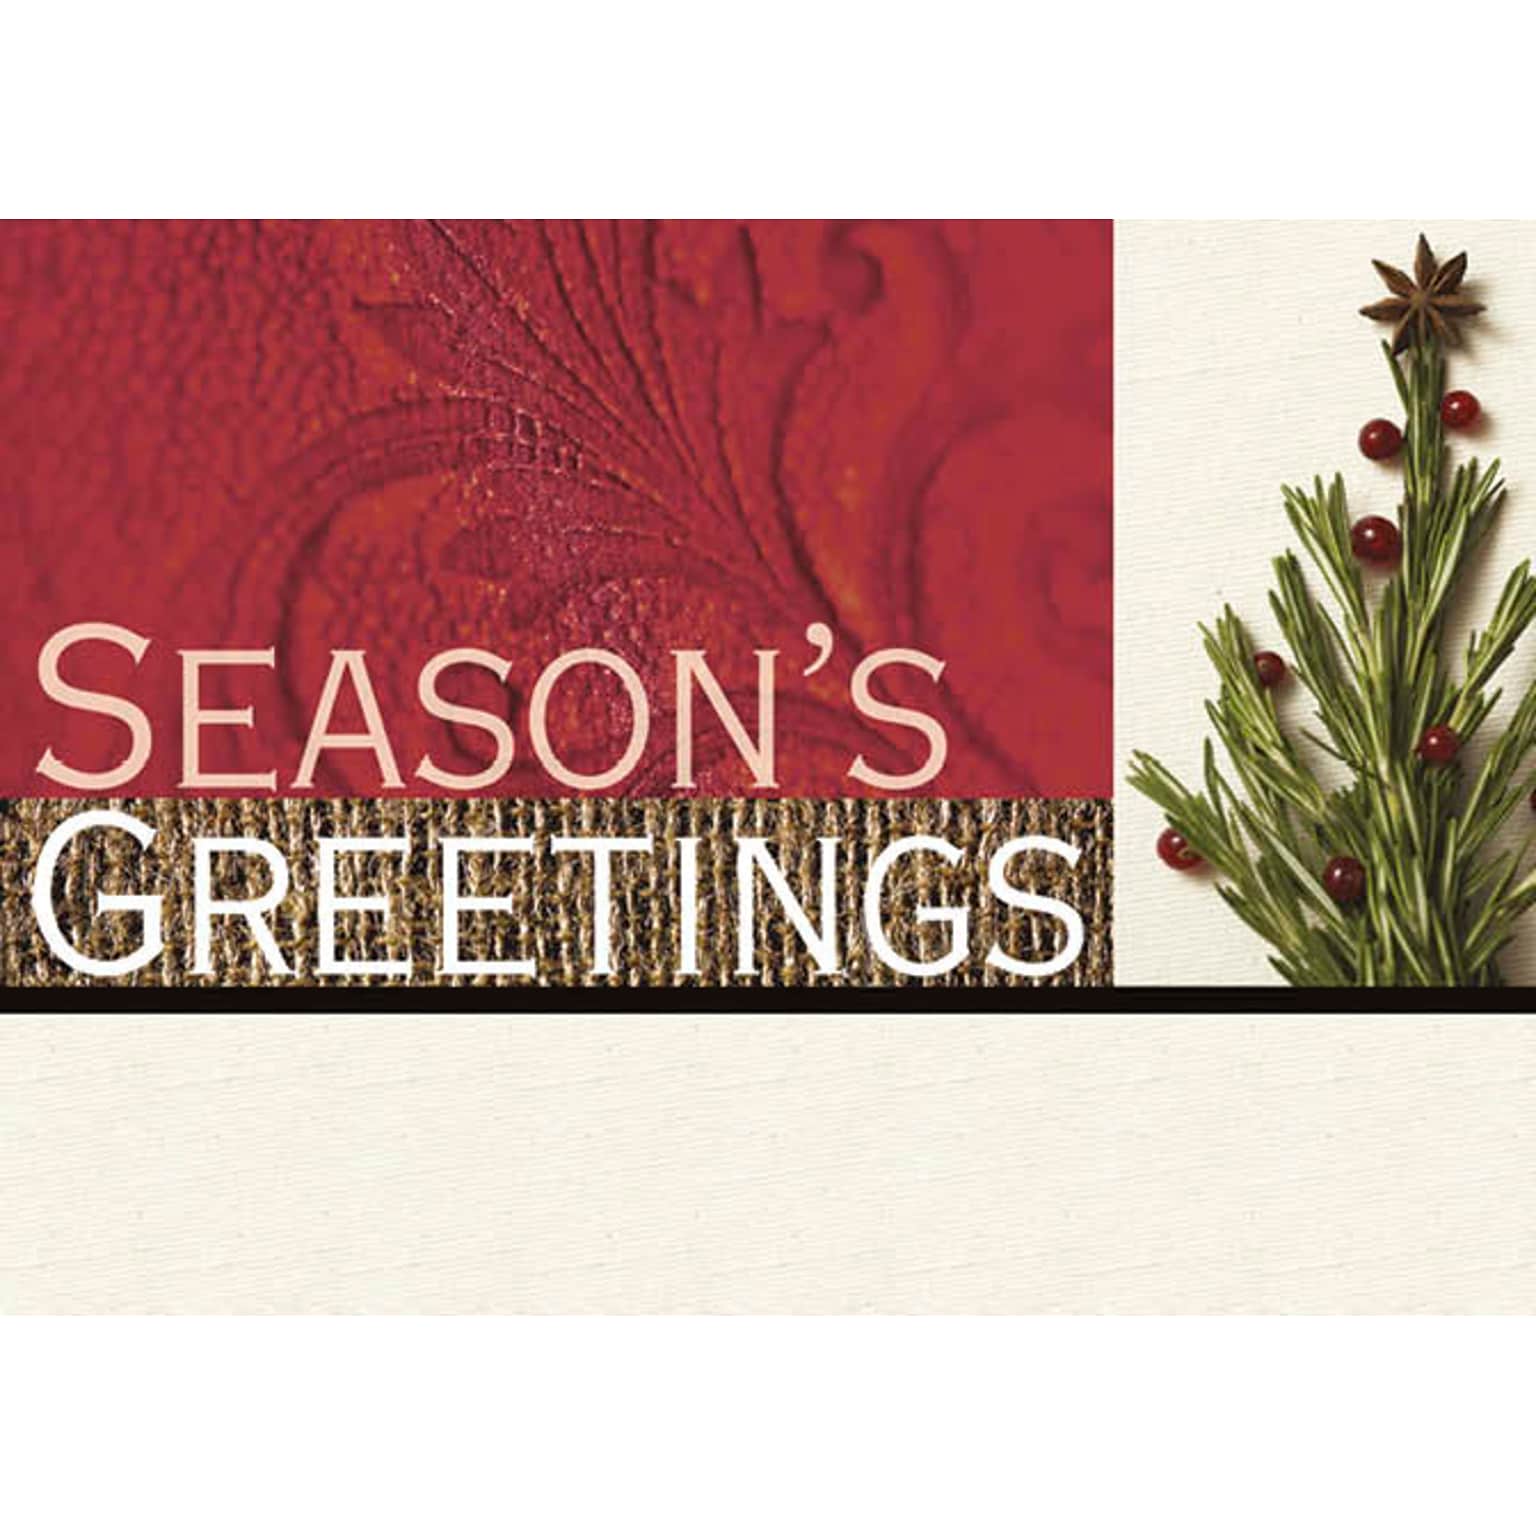 Seasons Greetings Pine Branch Holiday Greeting Cards, With A7 Envelopes, 7 x 5, 25 Cards per Set